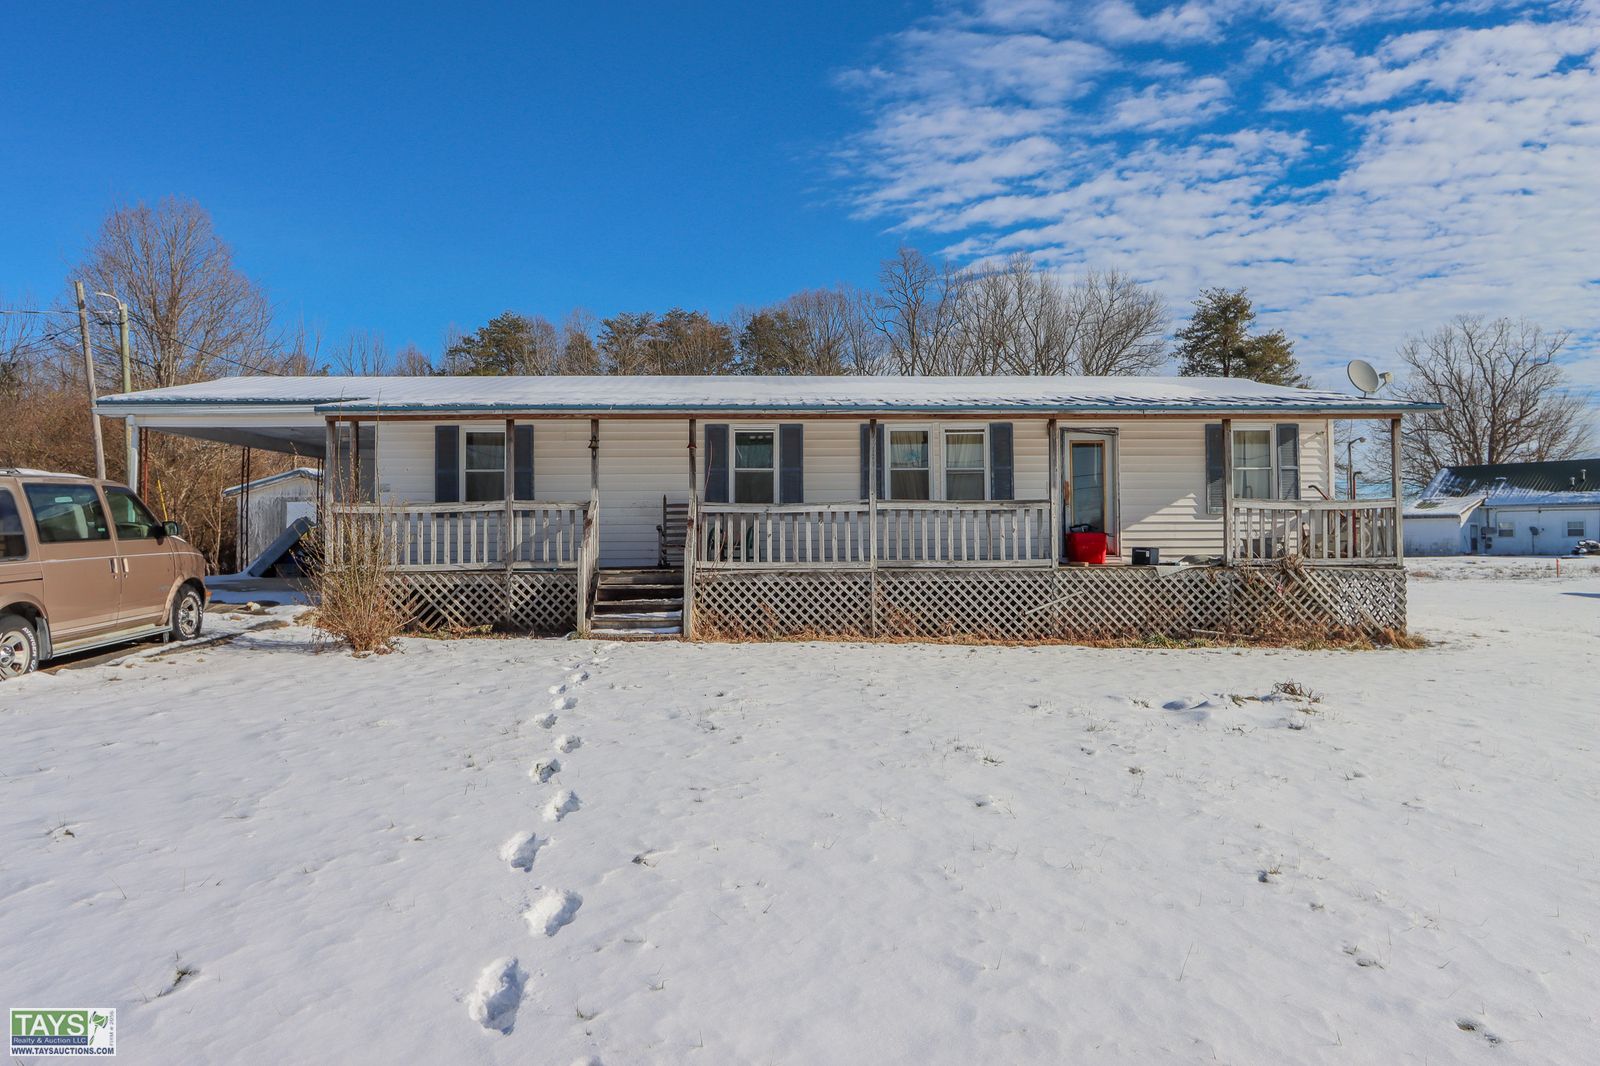 ONLINE ABSOLUTE AUCTION: 3 BR / 2 BA DOUBLE WIDE MOBILE HOME on 0.40 Ac±